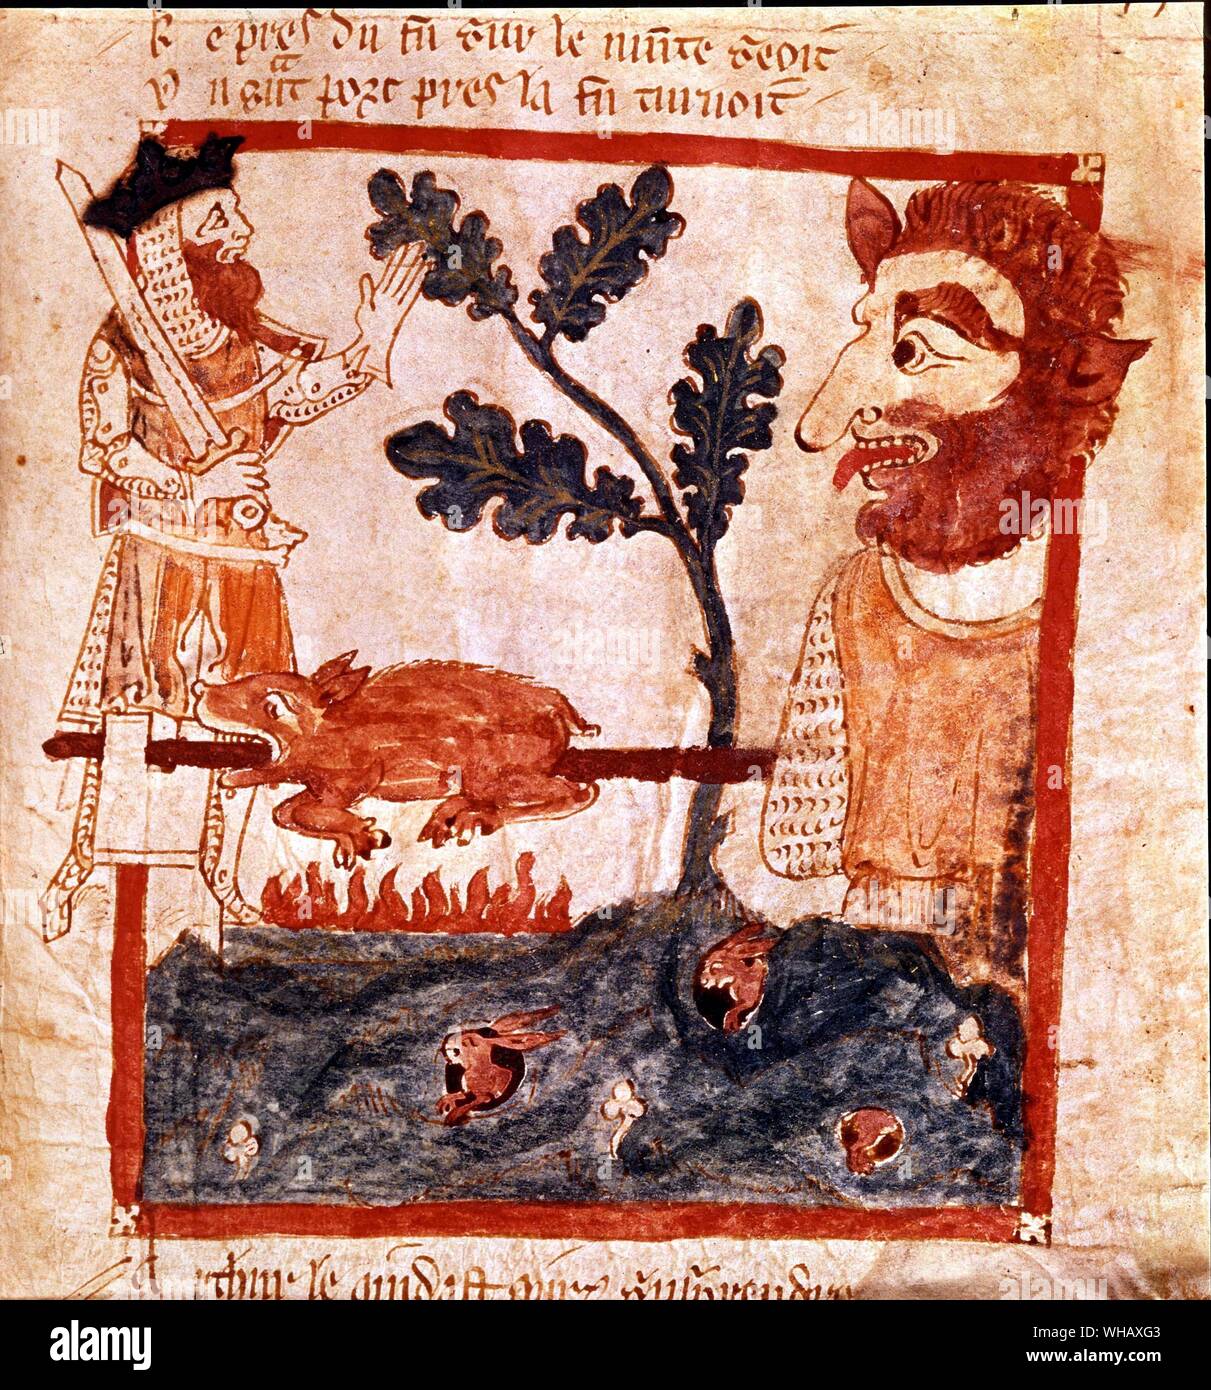 King Arthur meets the giant on Mount St Michael roasting a pig on a spit. 13th Century. Stock Photo